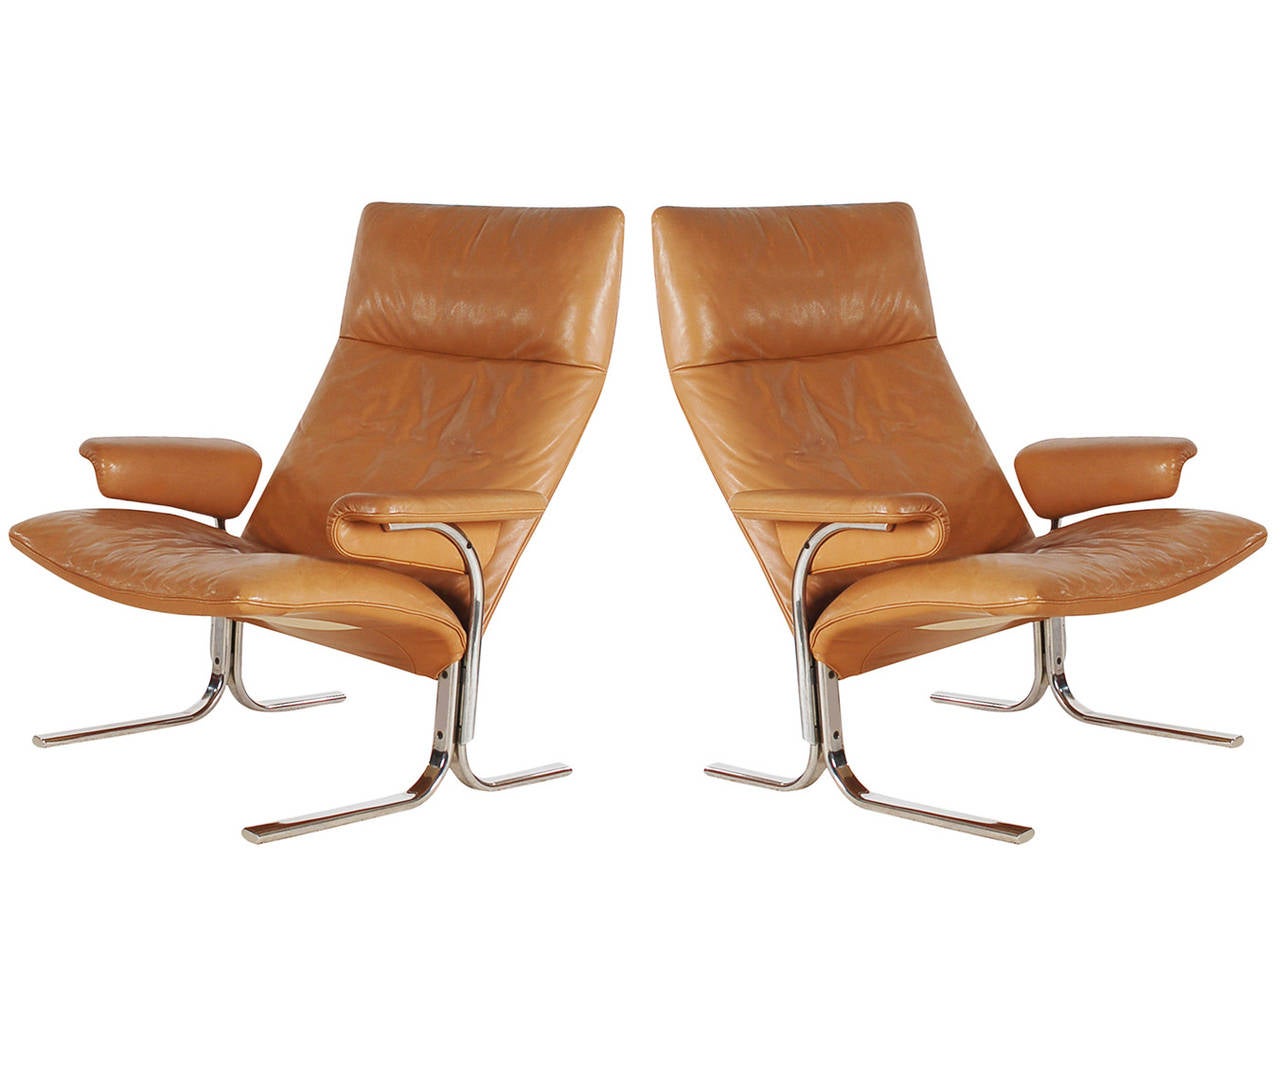 An incredibly stylish and comfortable pair of lounge chairs in tan leather. These were designed by Hans Eichenberger and produced by De Sede. These are extremely heavy and well made chairs from Switzerland. Manufacture labels to both.